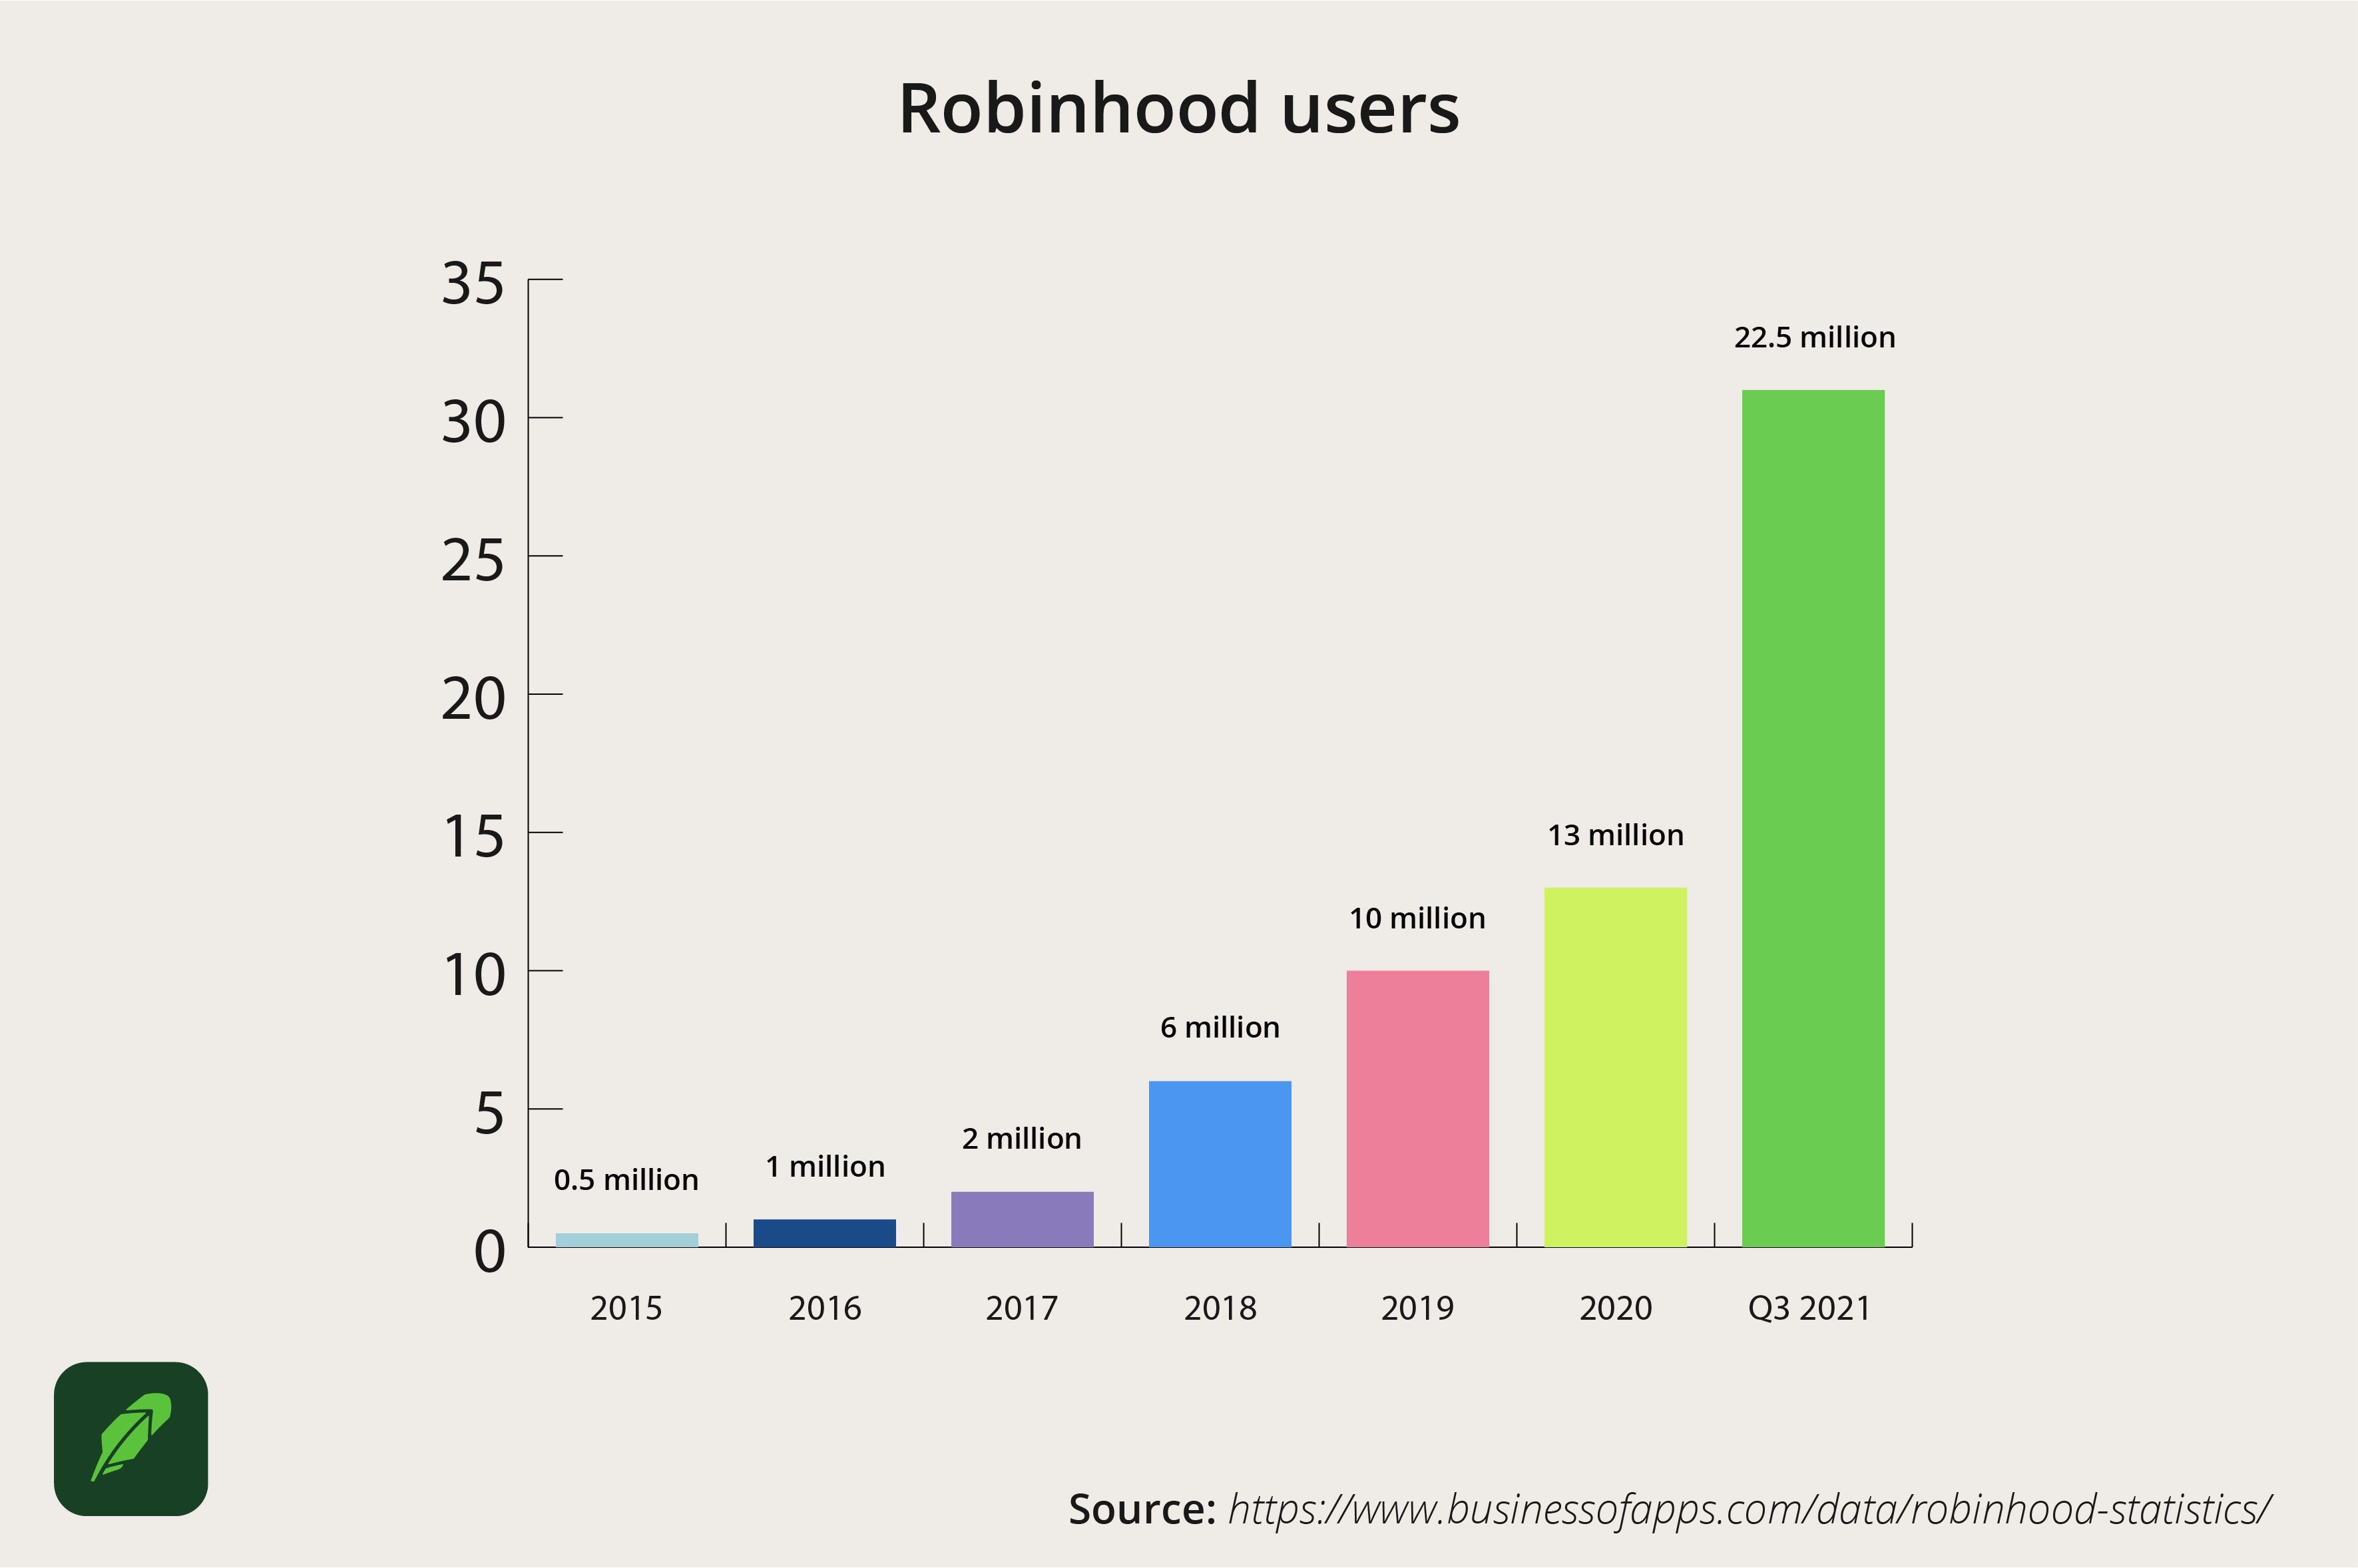 Robinhood angered banks. Now it wants to be one